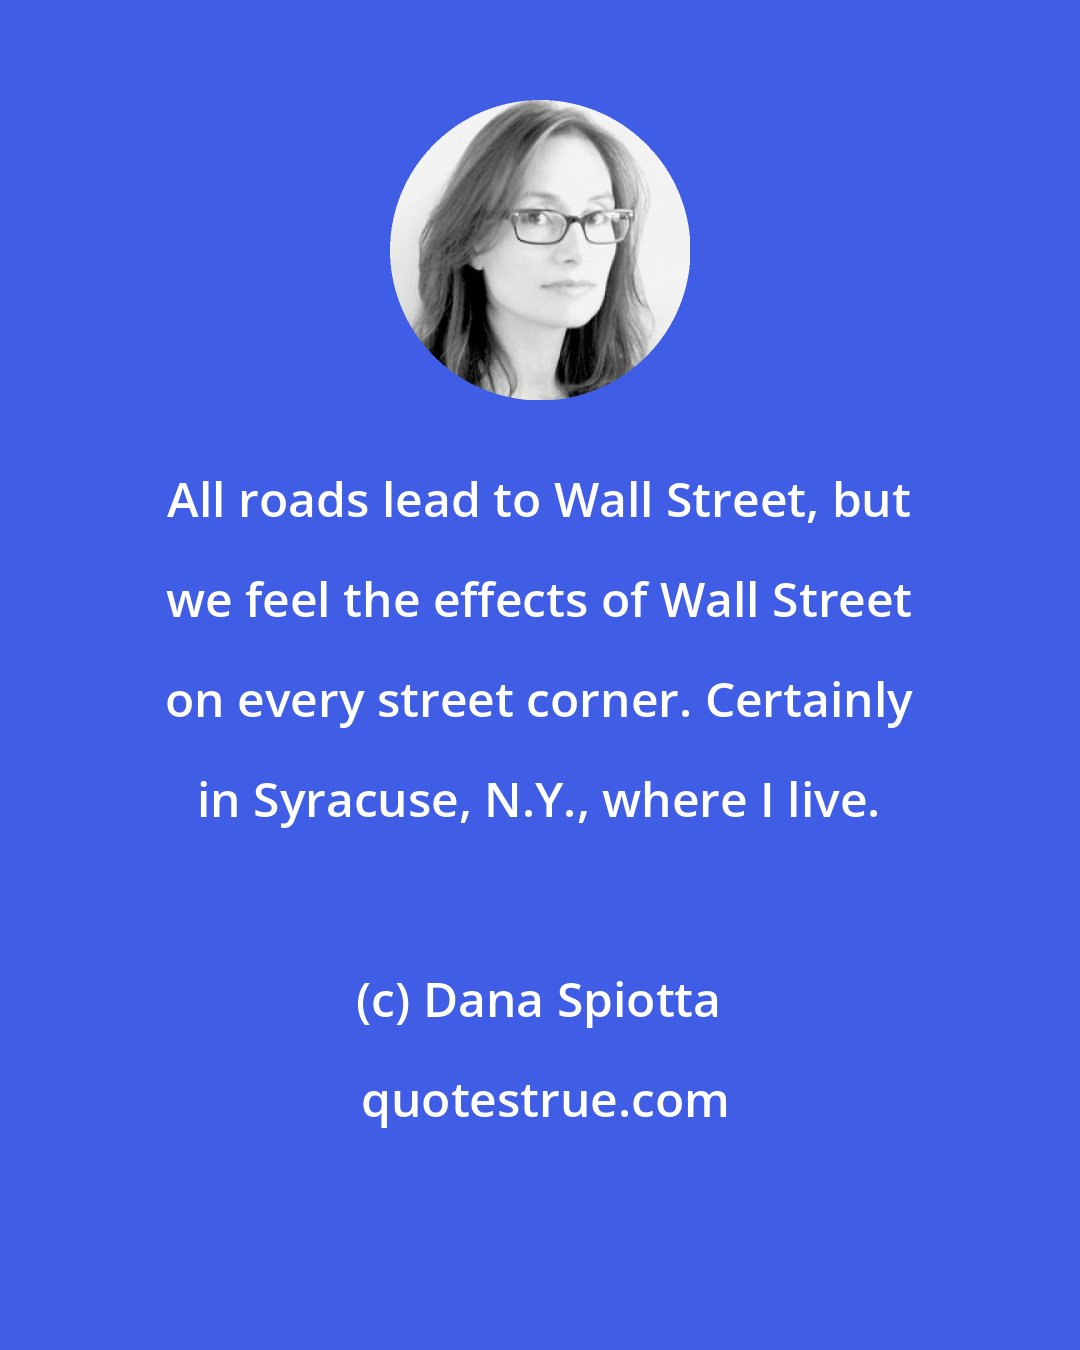 Dana Spiotta: All roads lead to Wall Street, but we feel the effects of Wall Street on every street corner. Certainly in Syracuse, N.Y., where I live.